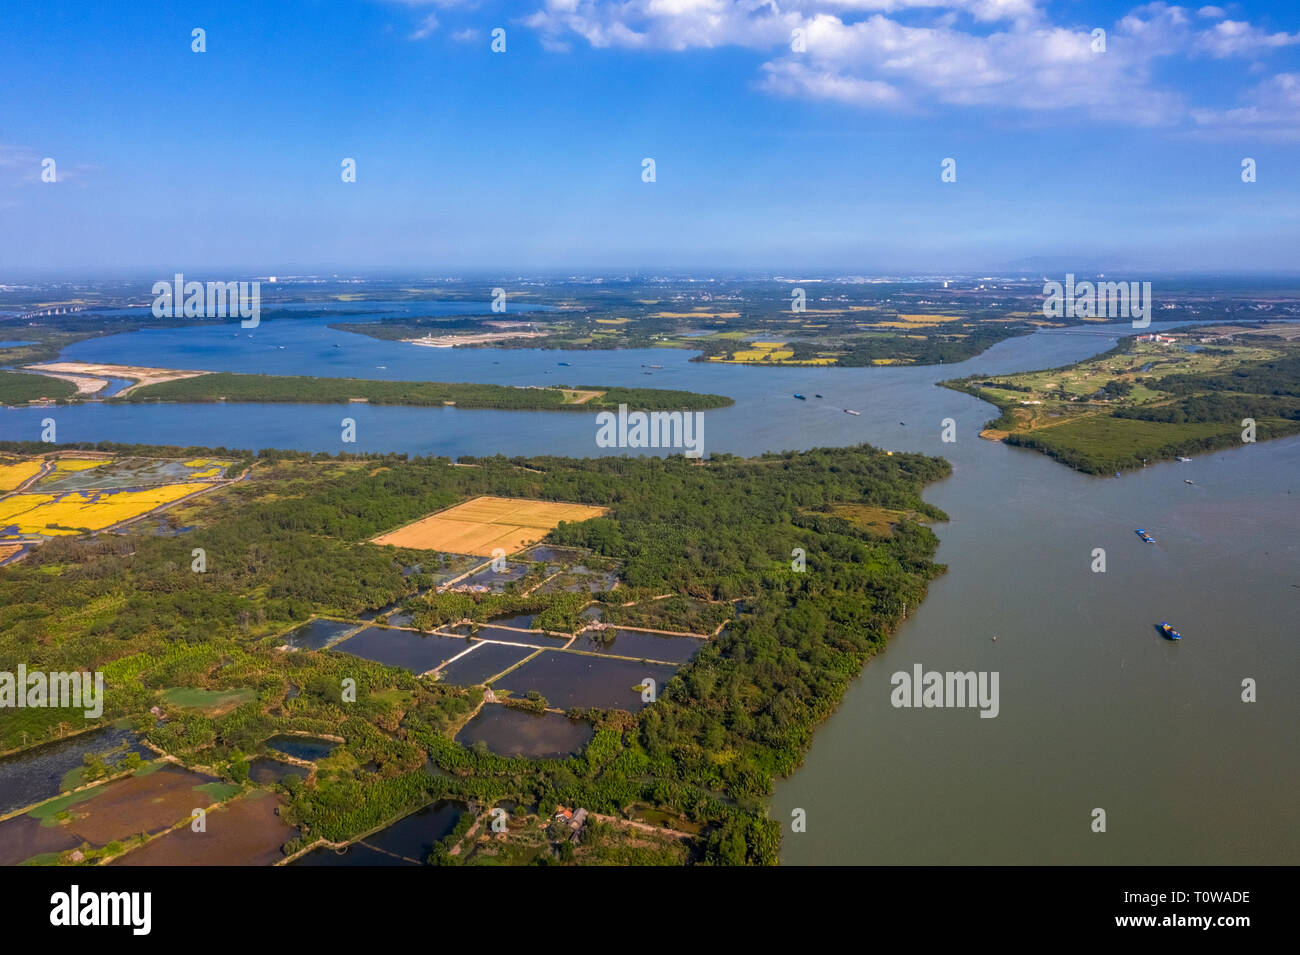 Top view aerial of Xoai Rap river, Ho Chi Minh City with development buildings, transportation, energy power infrastructure. Vietnam Stock Photo